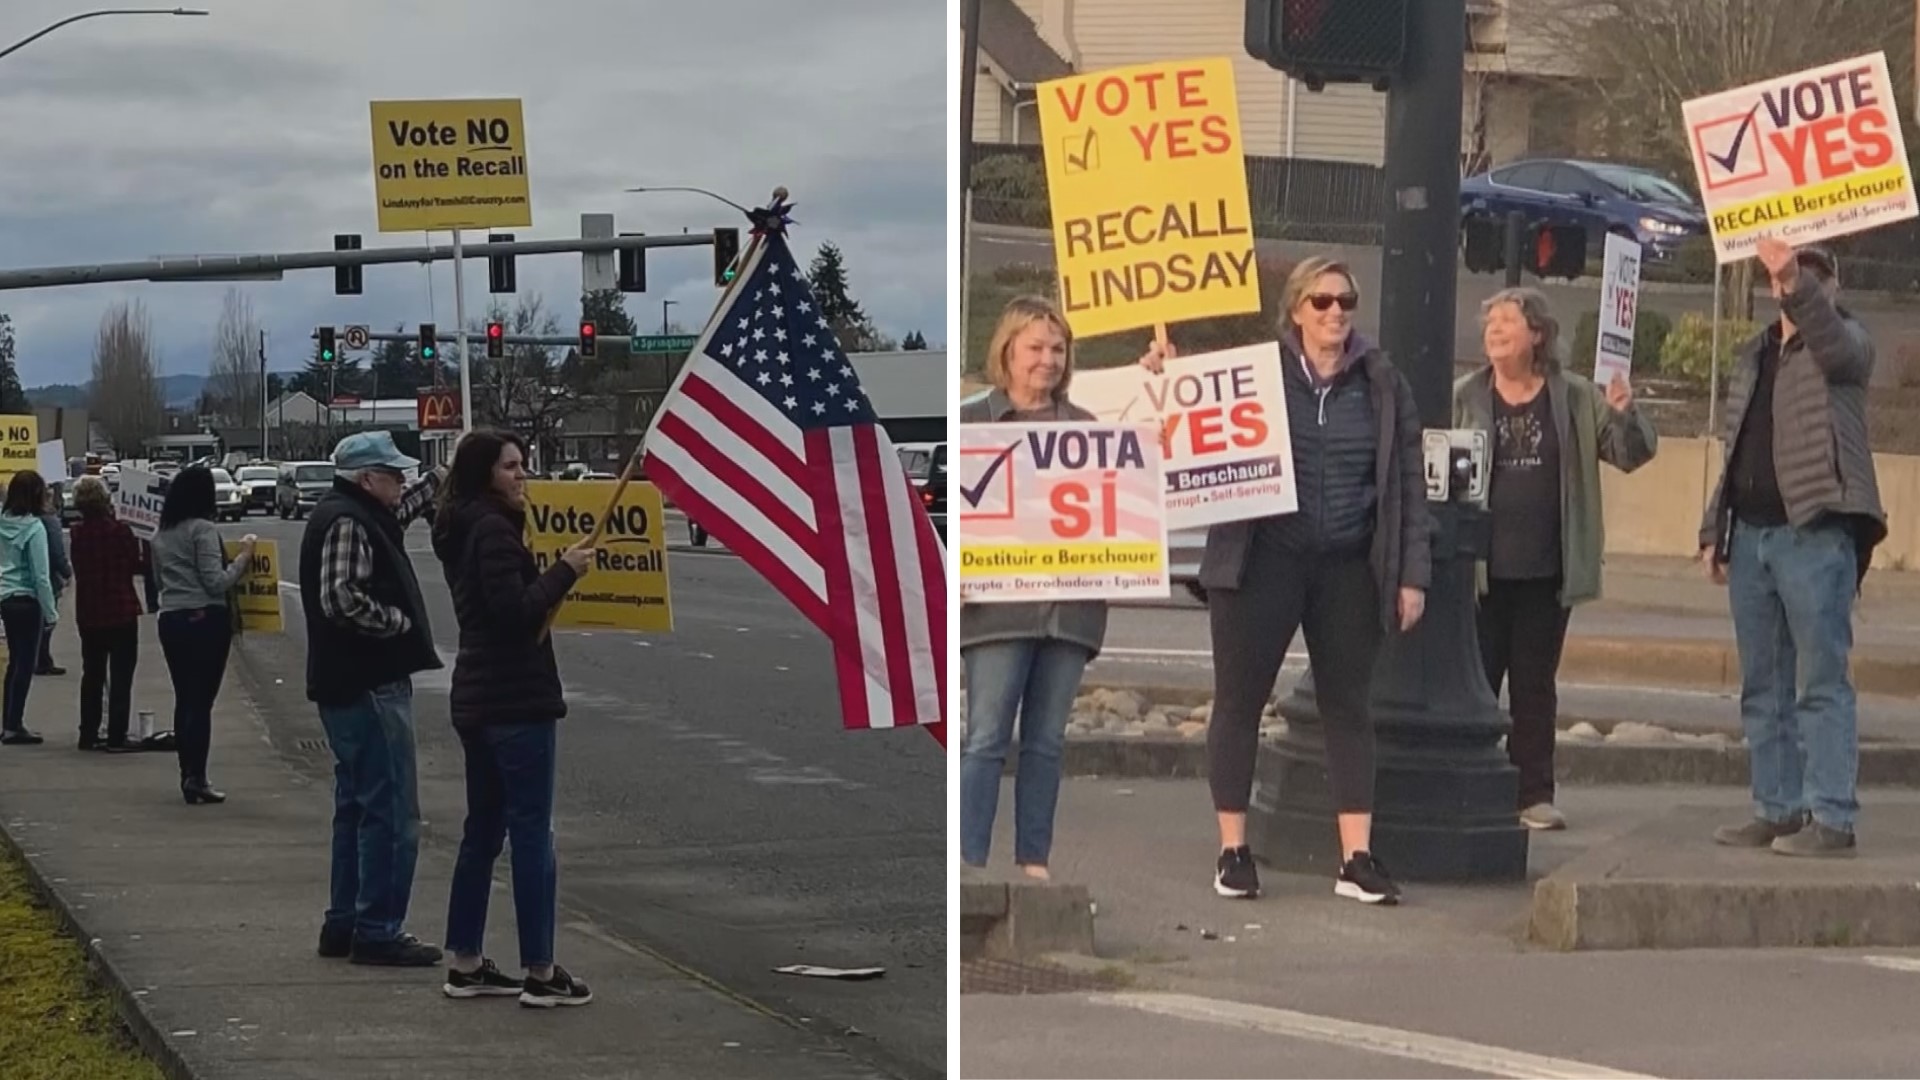 More than 52% of voters opposed recalling Lindsay Berschauer and about 48% of voters were in favor of the recall, according to the Yamhill County Election Office.